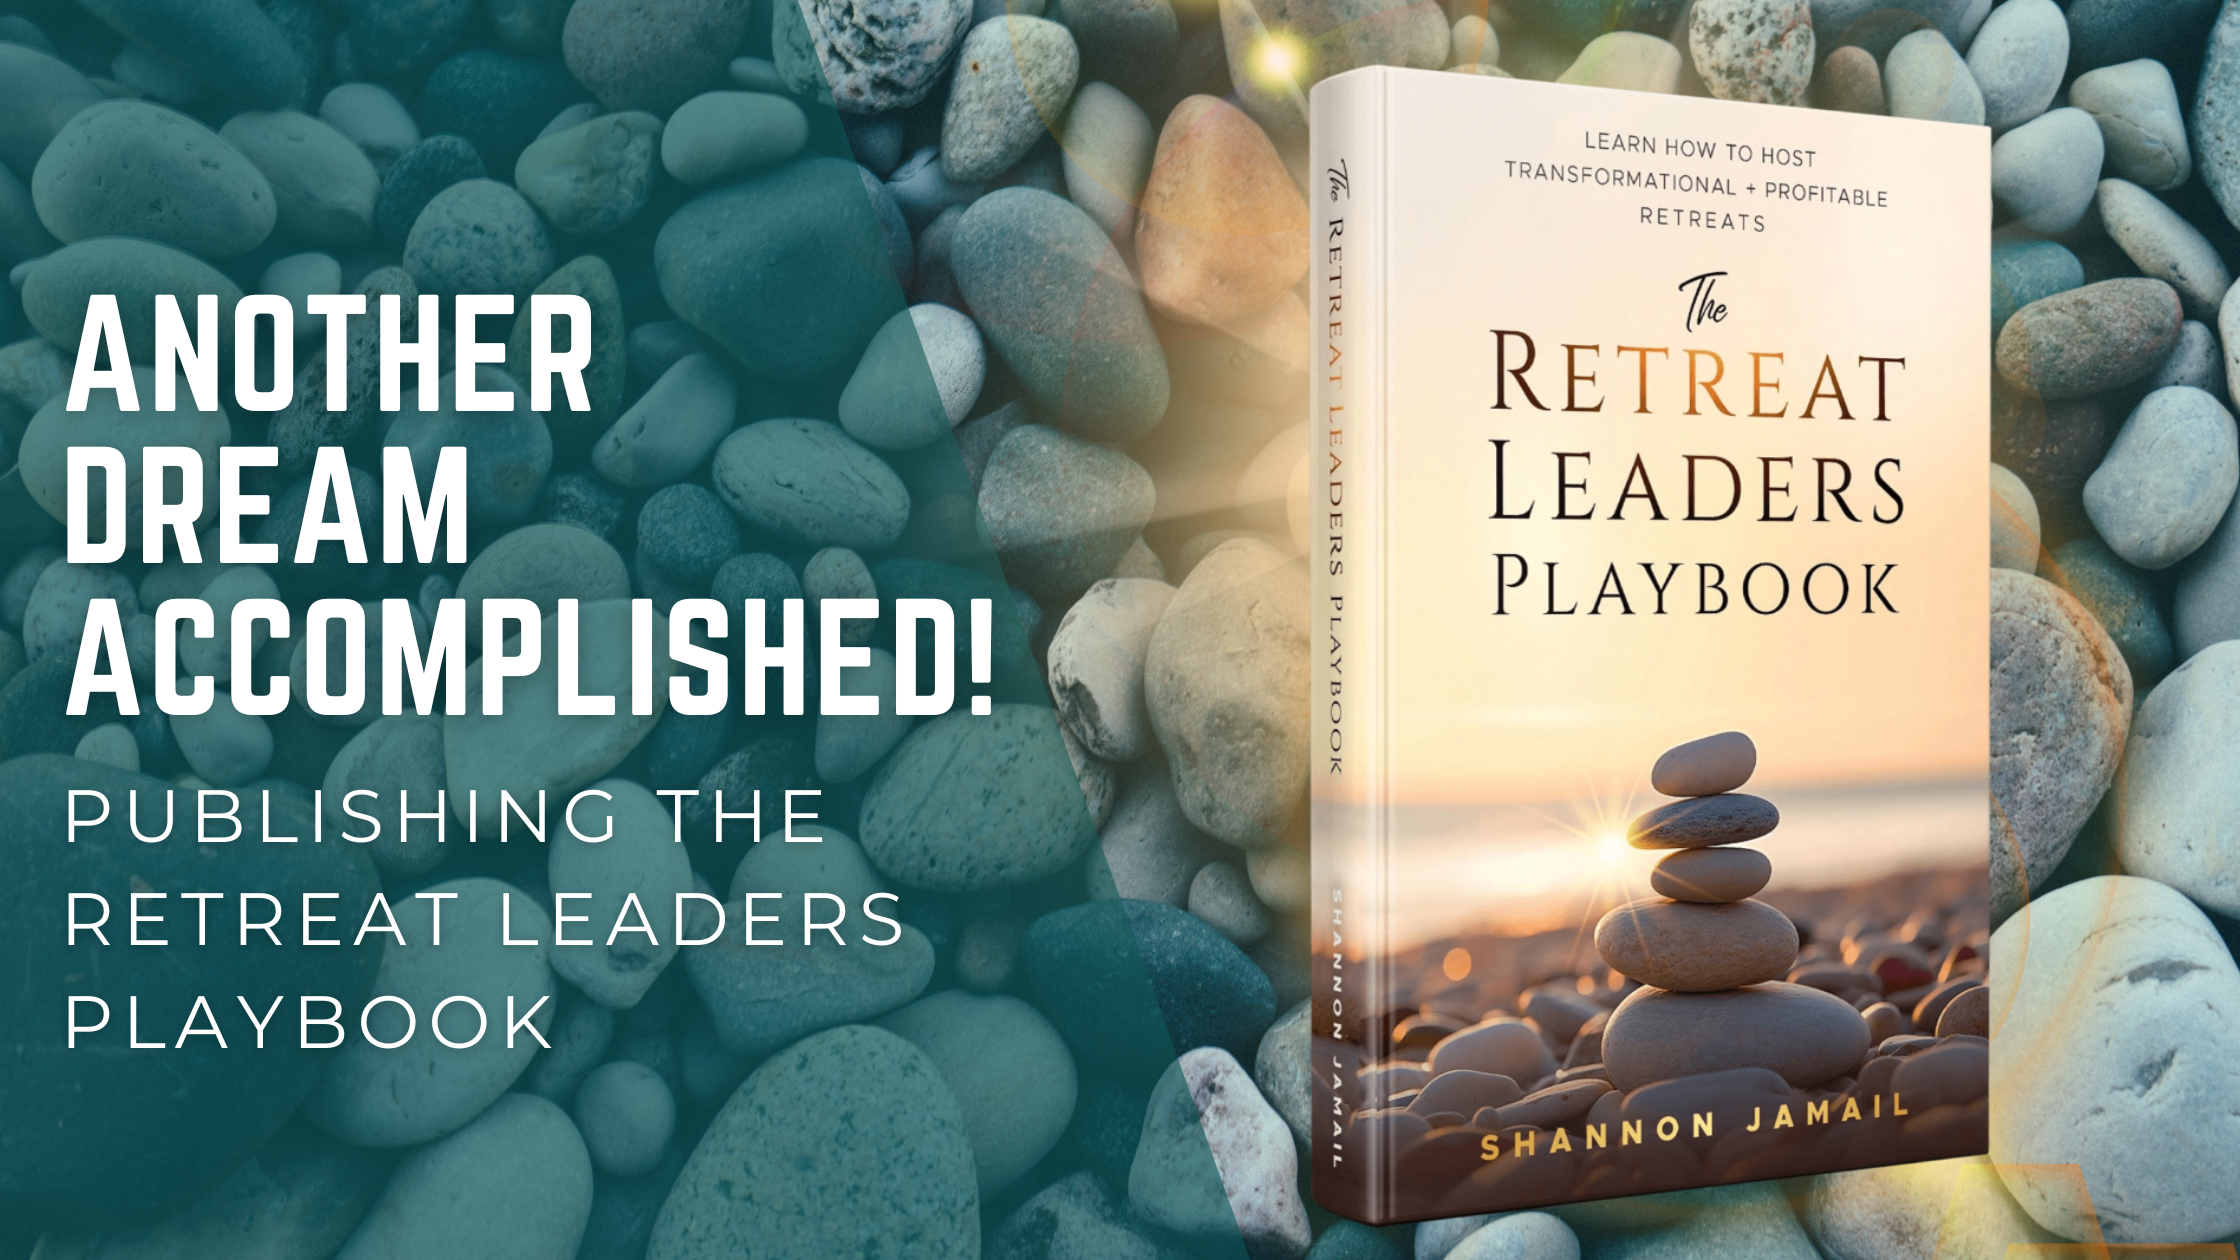 Blog Banner with Book: The Retreat Leaders Playbook by Shannon Jamail